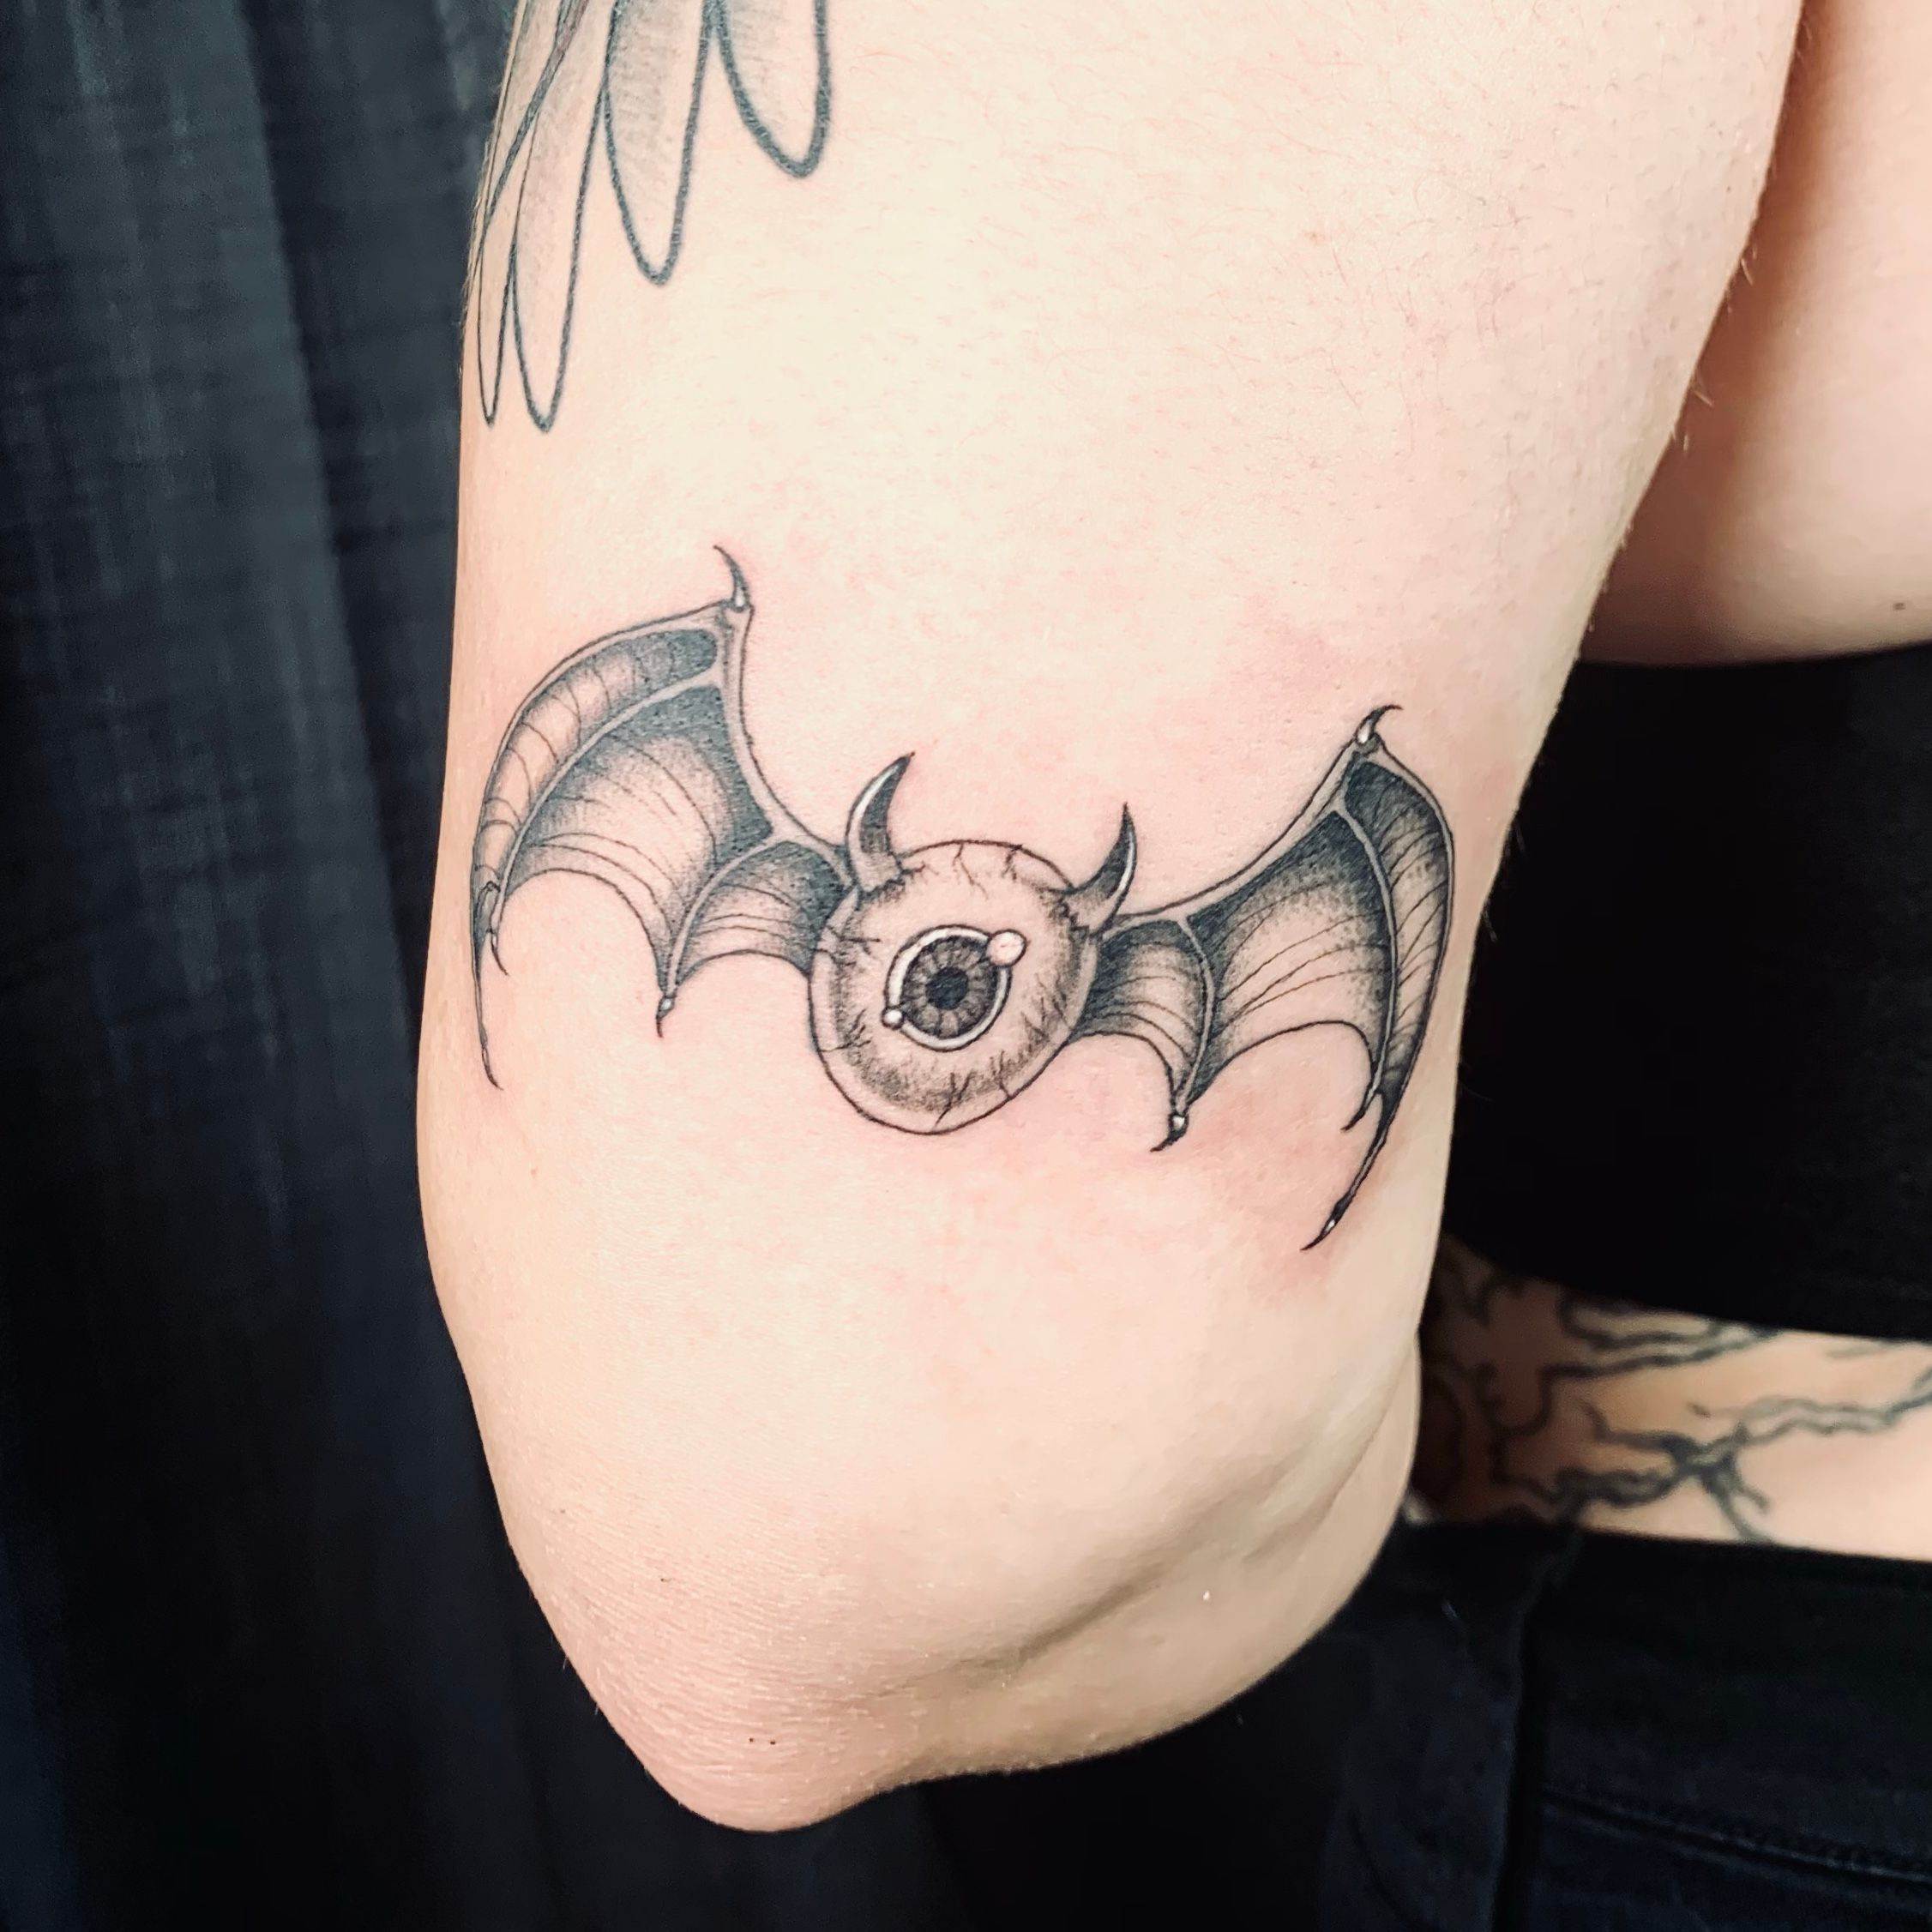 Well, my timing couldn't have been better (or worse). I scheduled my first  Berserk tattoo all the way back in March and yesterday was the big day.  Never thought I'd be so